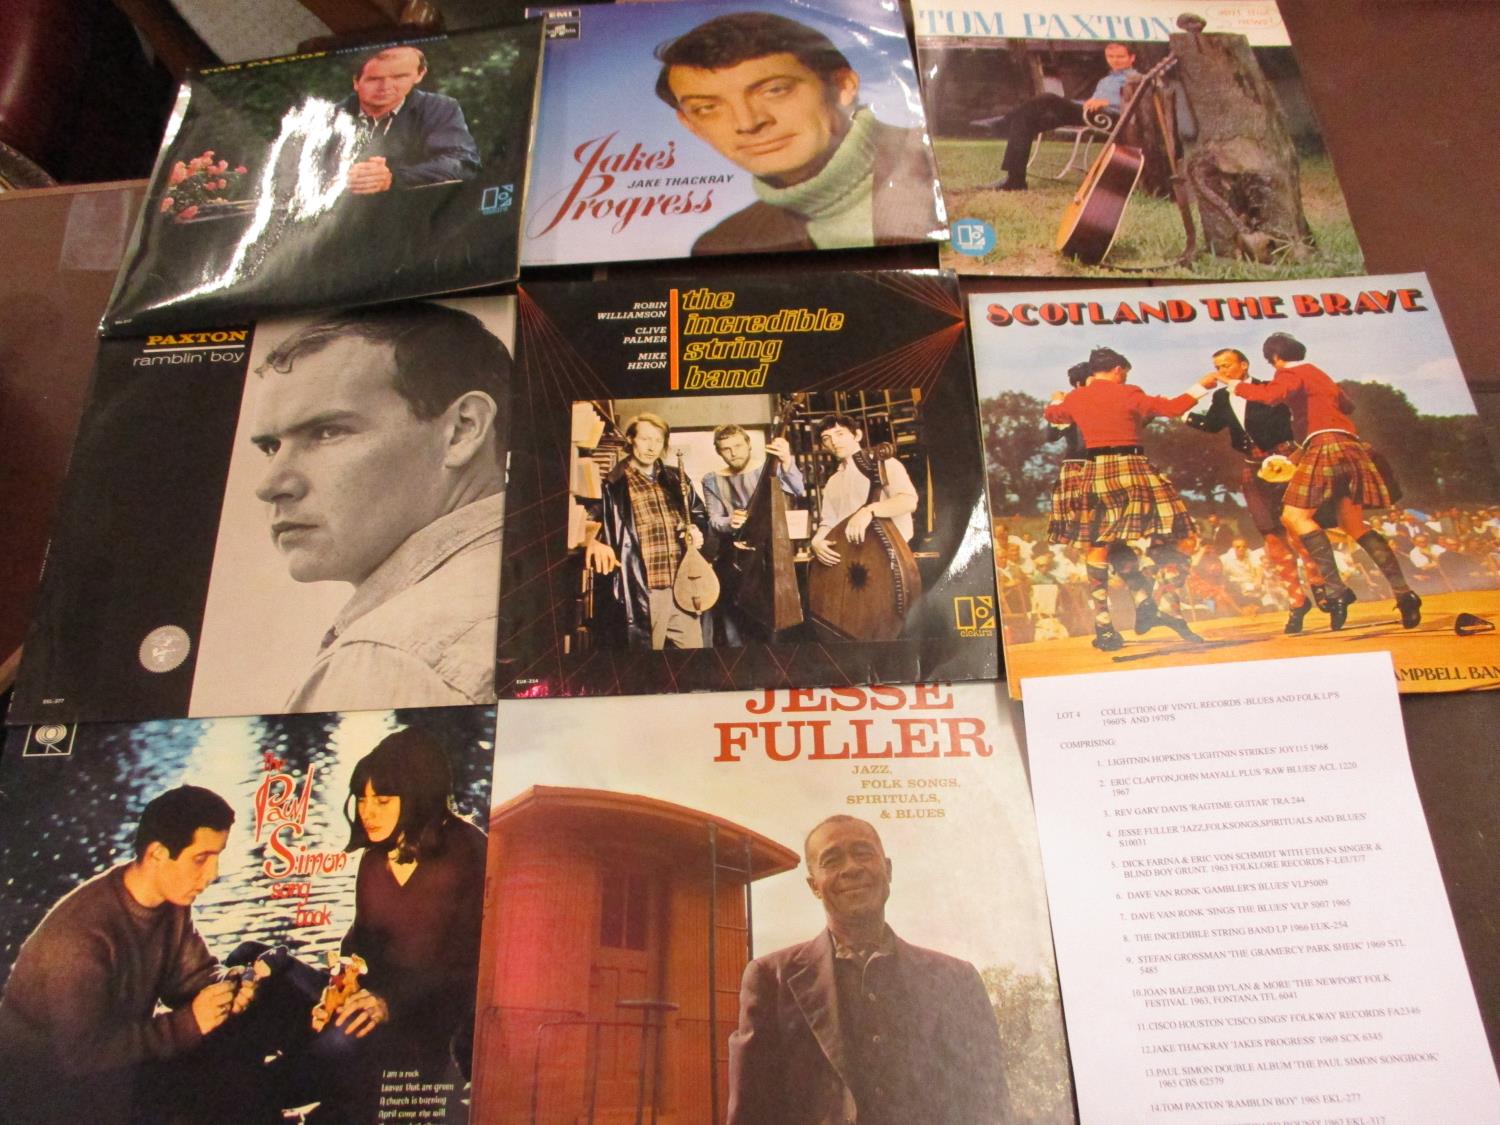 Collection of vinyl long playing records including Eric Clapton, Joan Baez and Tom Paxton - Image 2 of 6